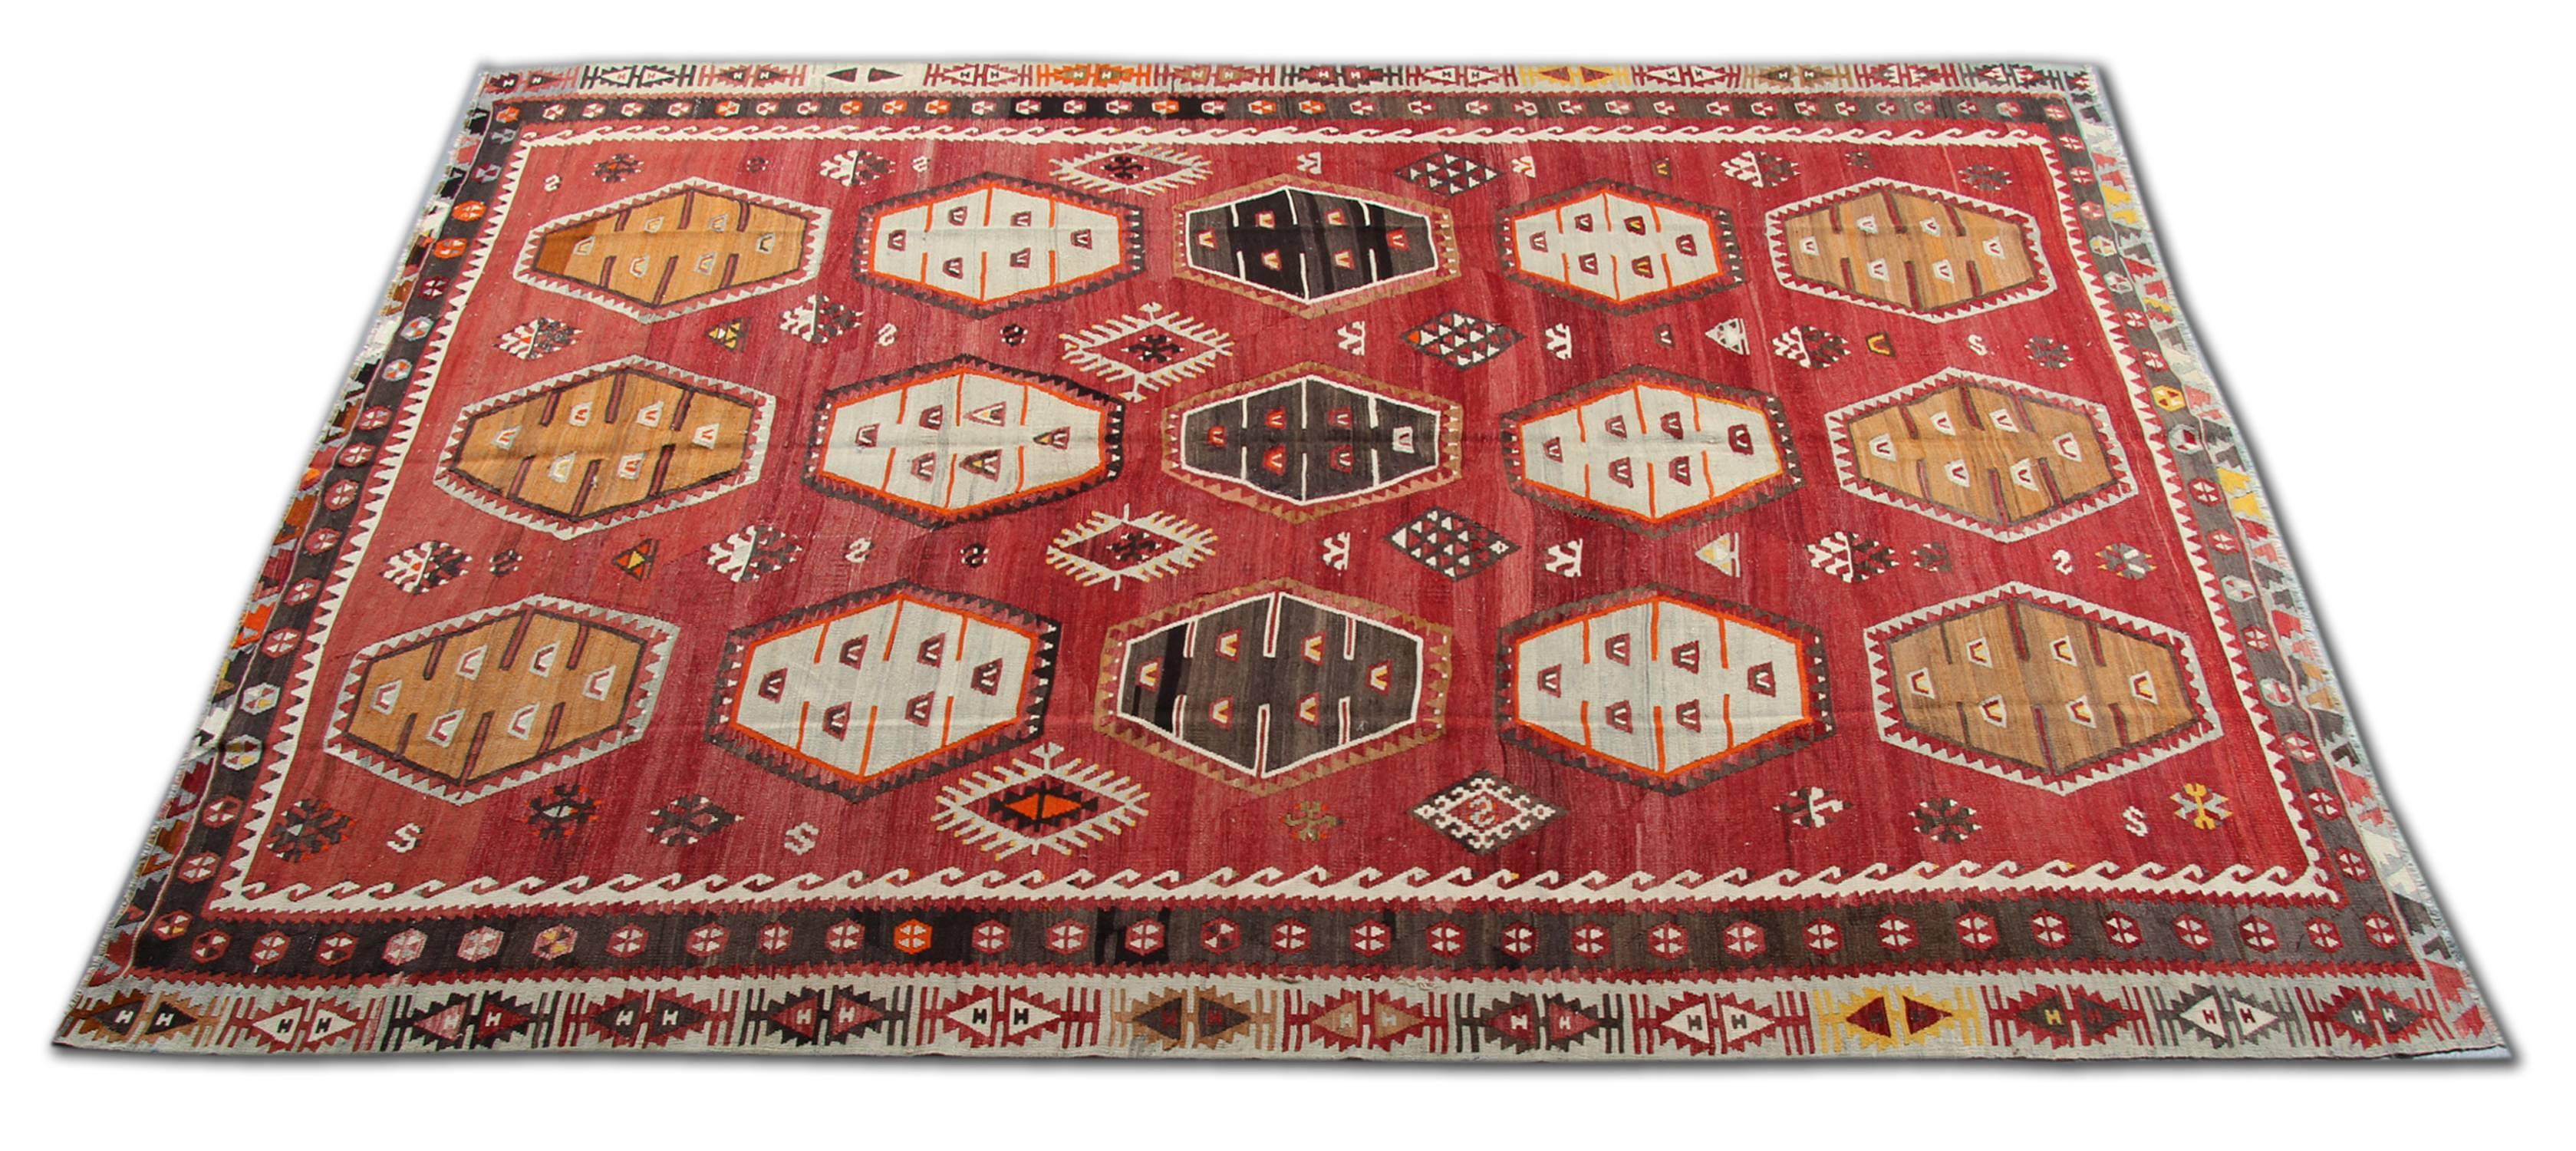 The Sarkisla red rug could enhance the decor and work as a living room or dining room rugs. The geometric floor rug and its bold design can be most appropriate for a bedroom rug. Red rugs are one of the most decorative rugs, Turkish Kilim can be an